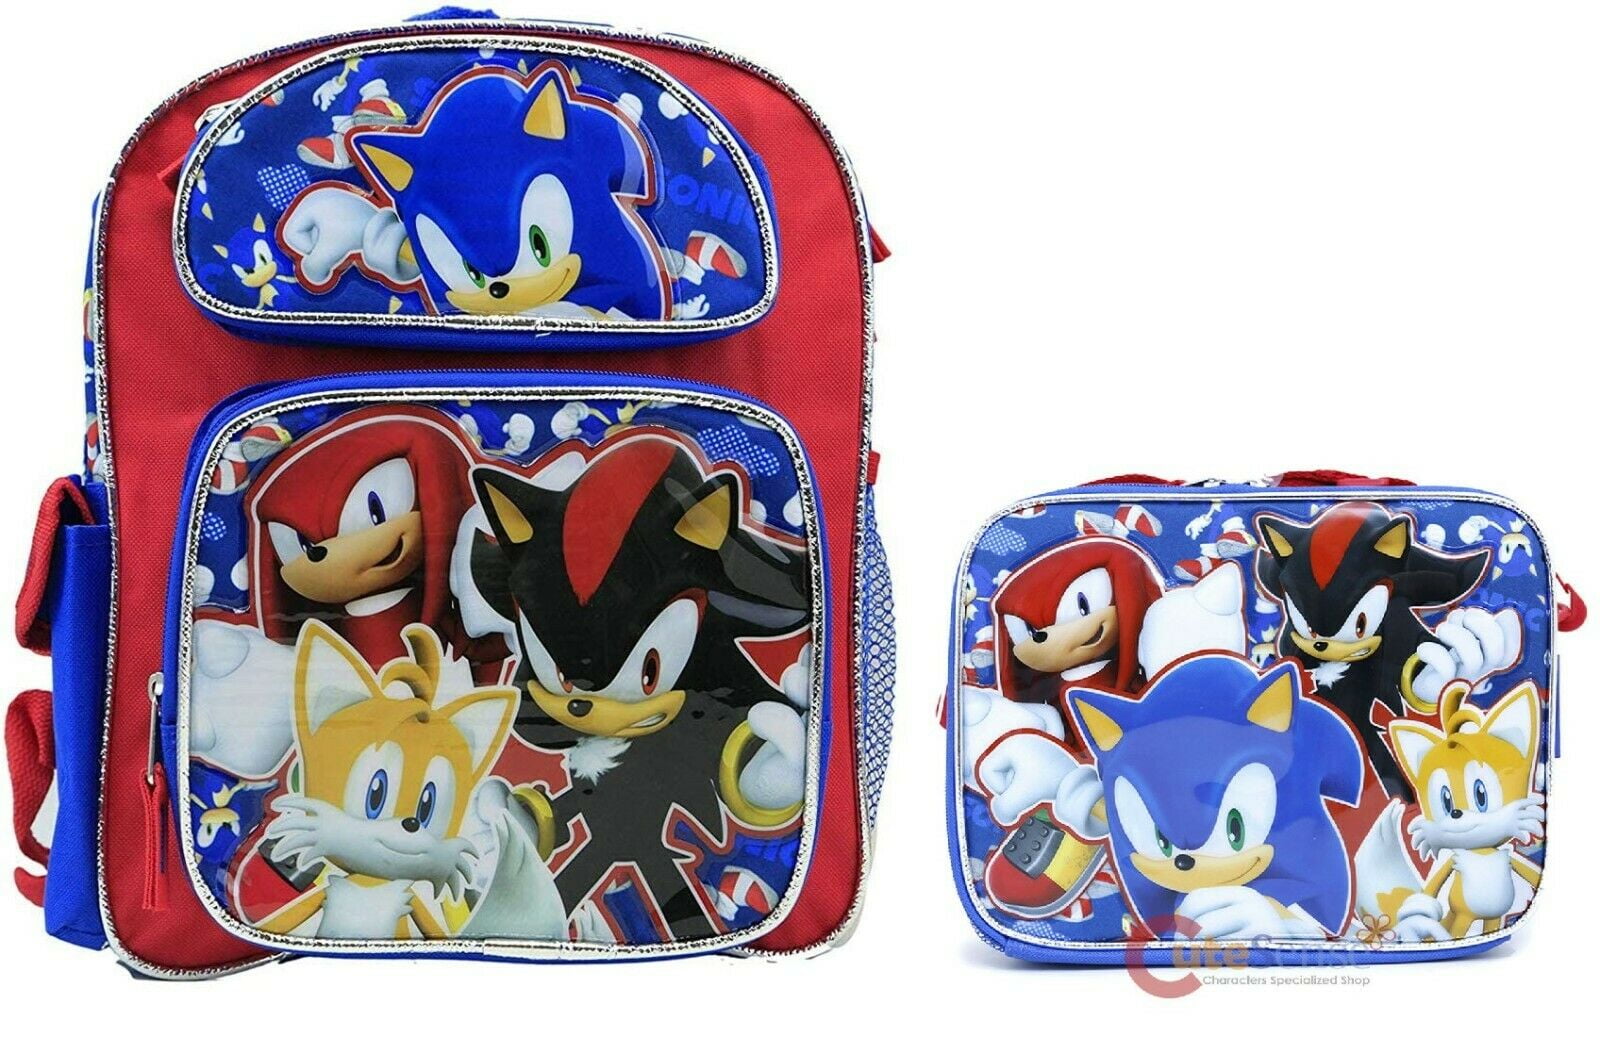 Boom Sonic the Hedgehog Team 12" inches Small Backpack & Lunch Box Licensed 